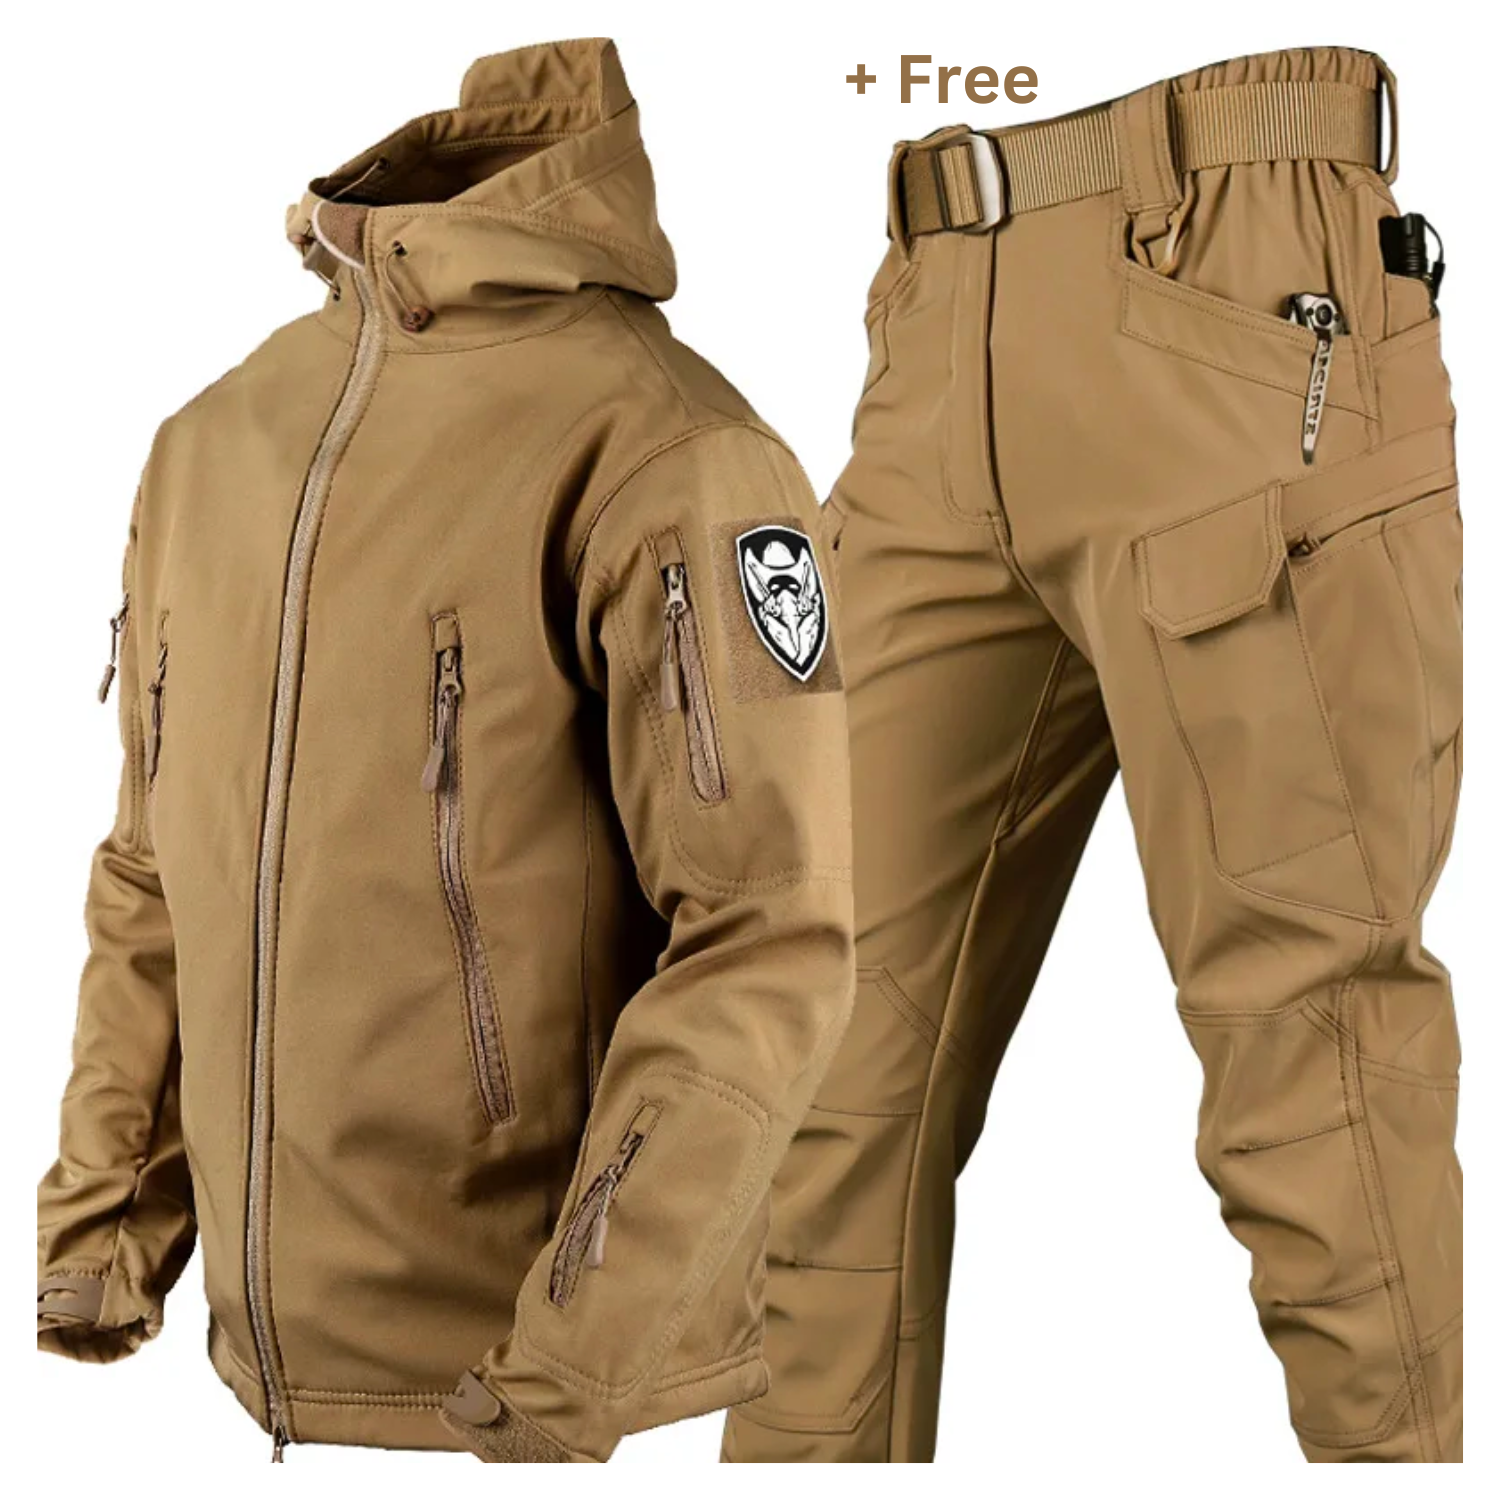 Healthier Life with Allpine™ - Windbreaker Jacket And Free Pants_SaleValour